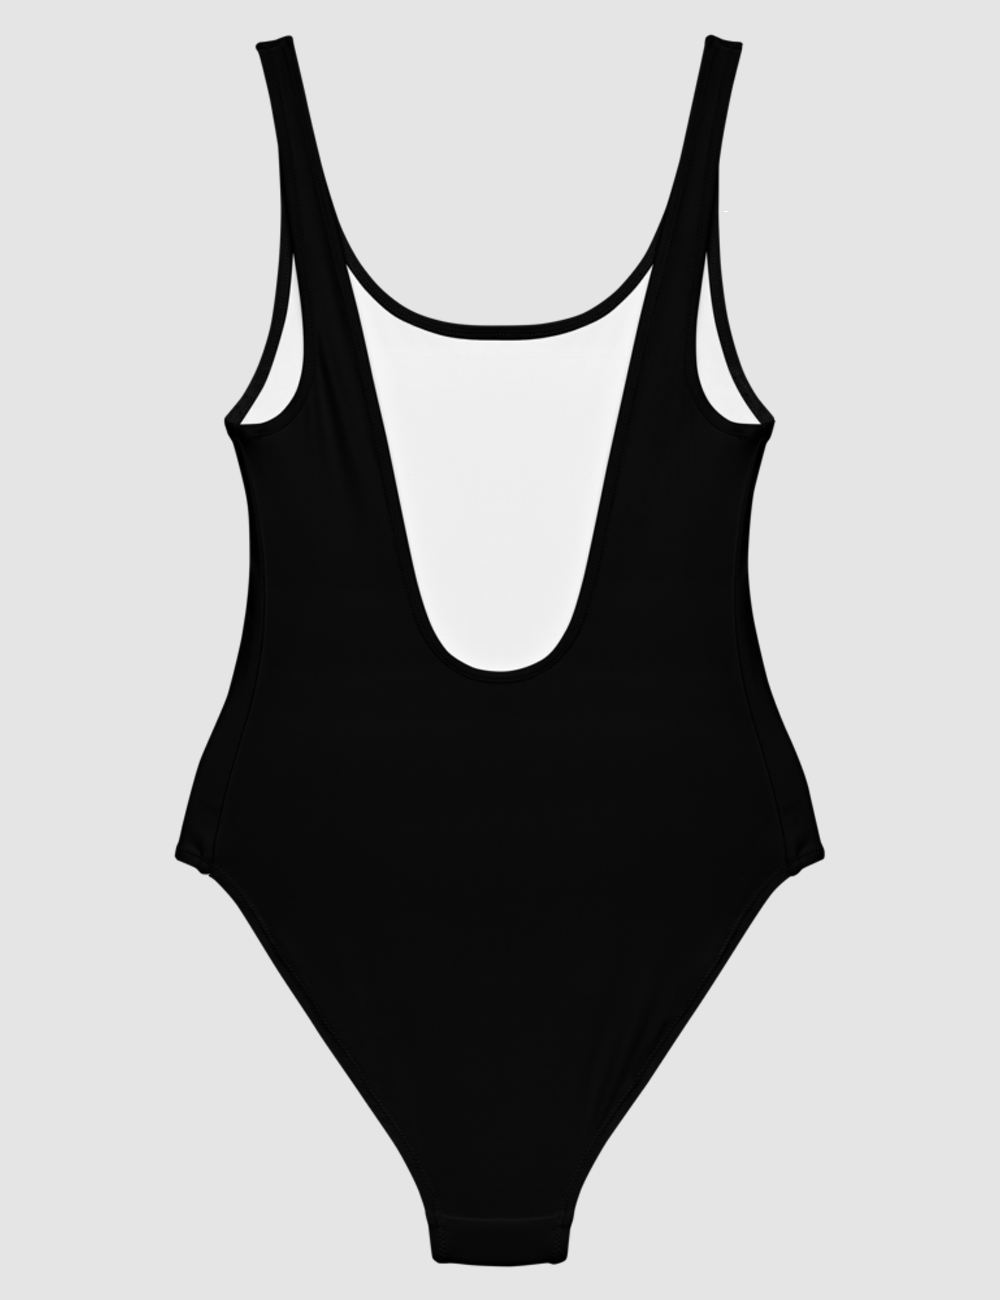 I Just Want Some Head In A Comfortable Bed | Women's One-Piece Swimsuit OniTakai